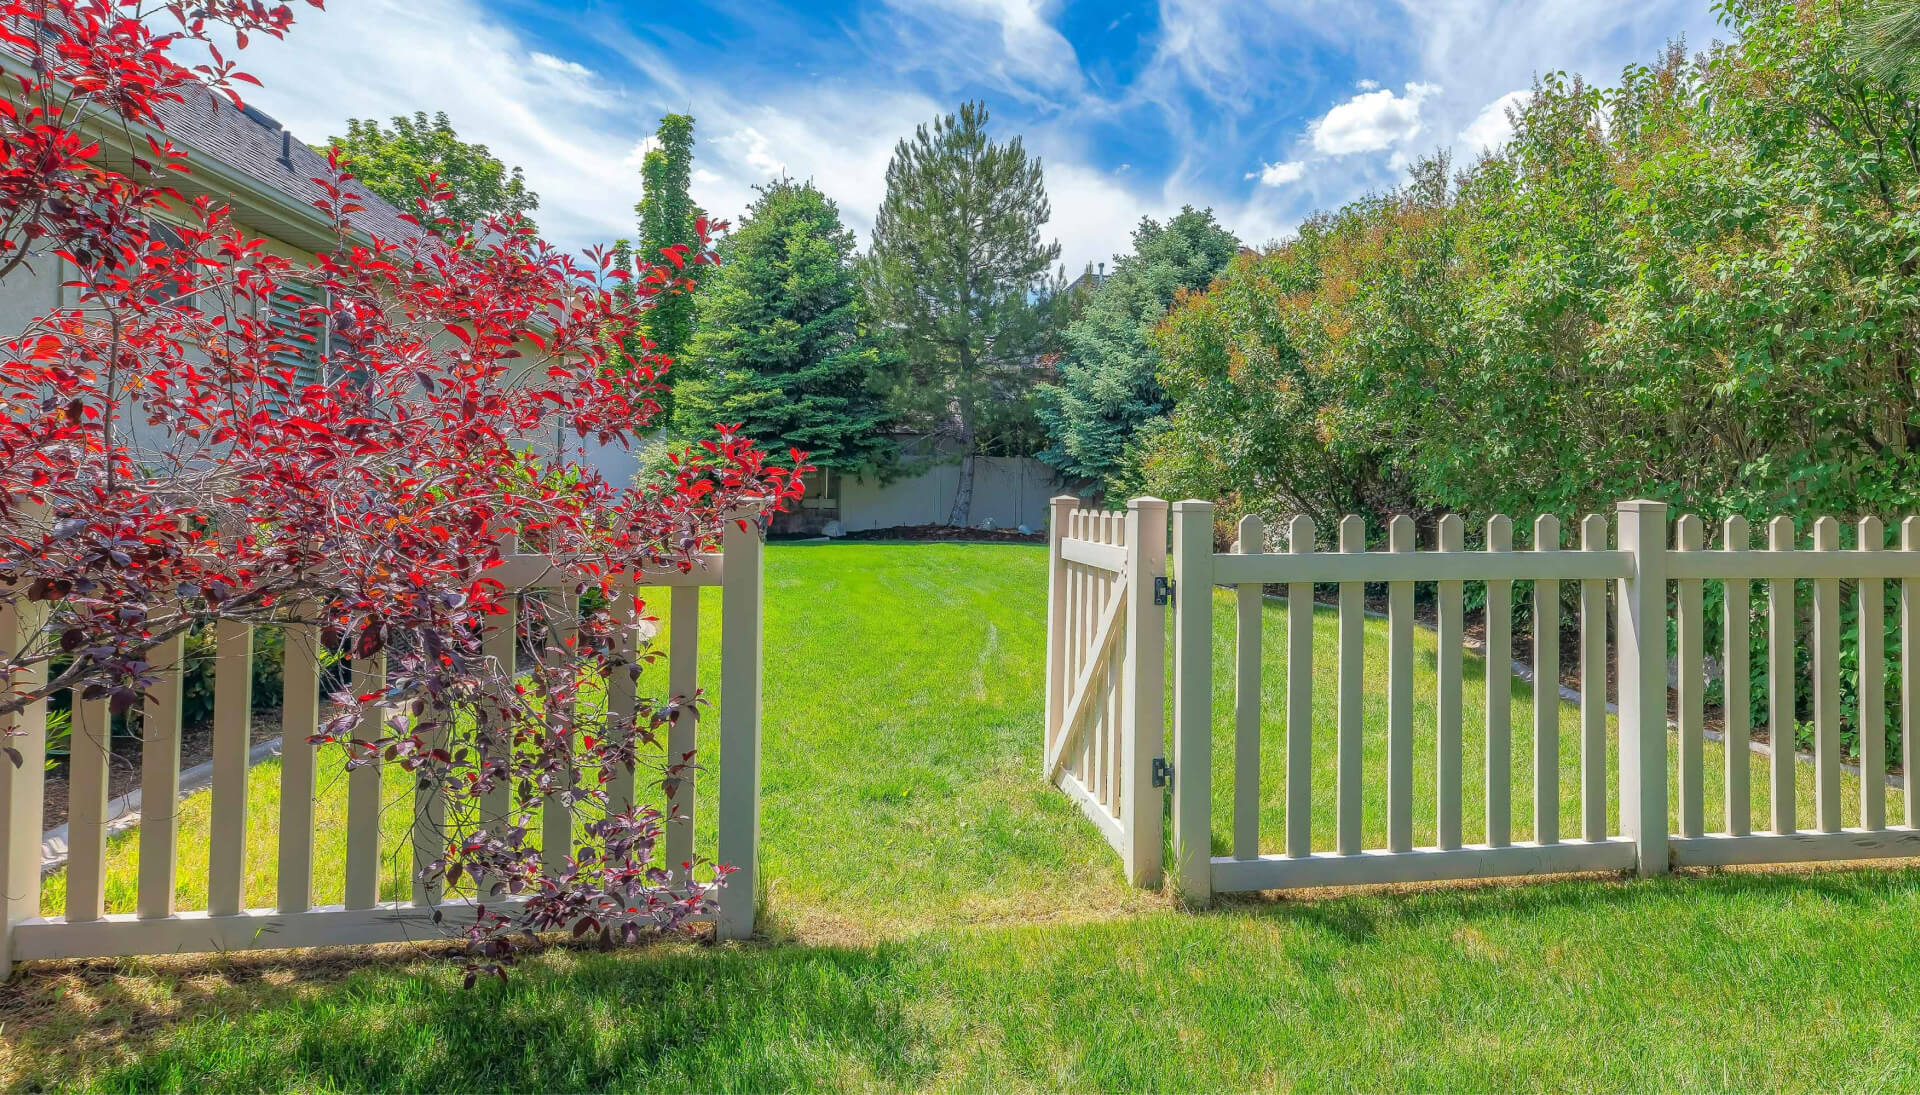 A functional fence gate providing access to a well-maintained backyard, surrounded by a wooden fence in Fairfield